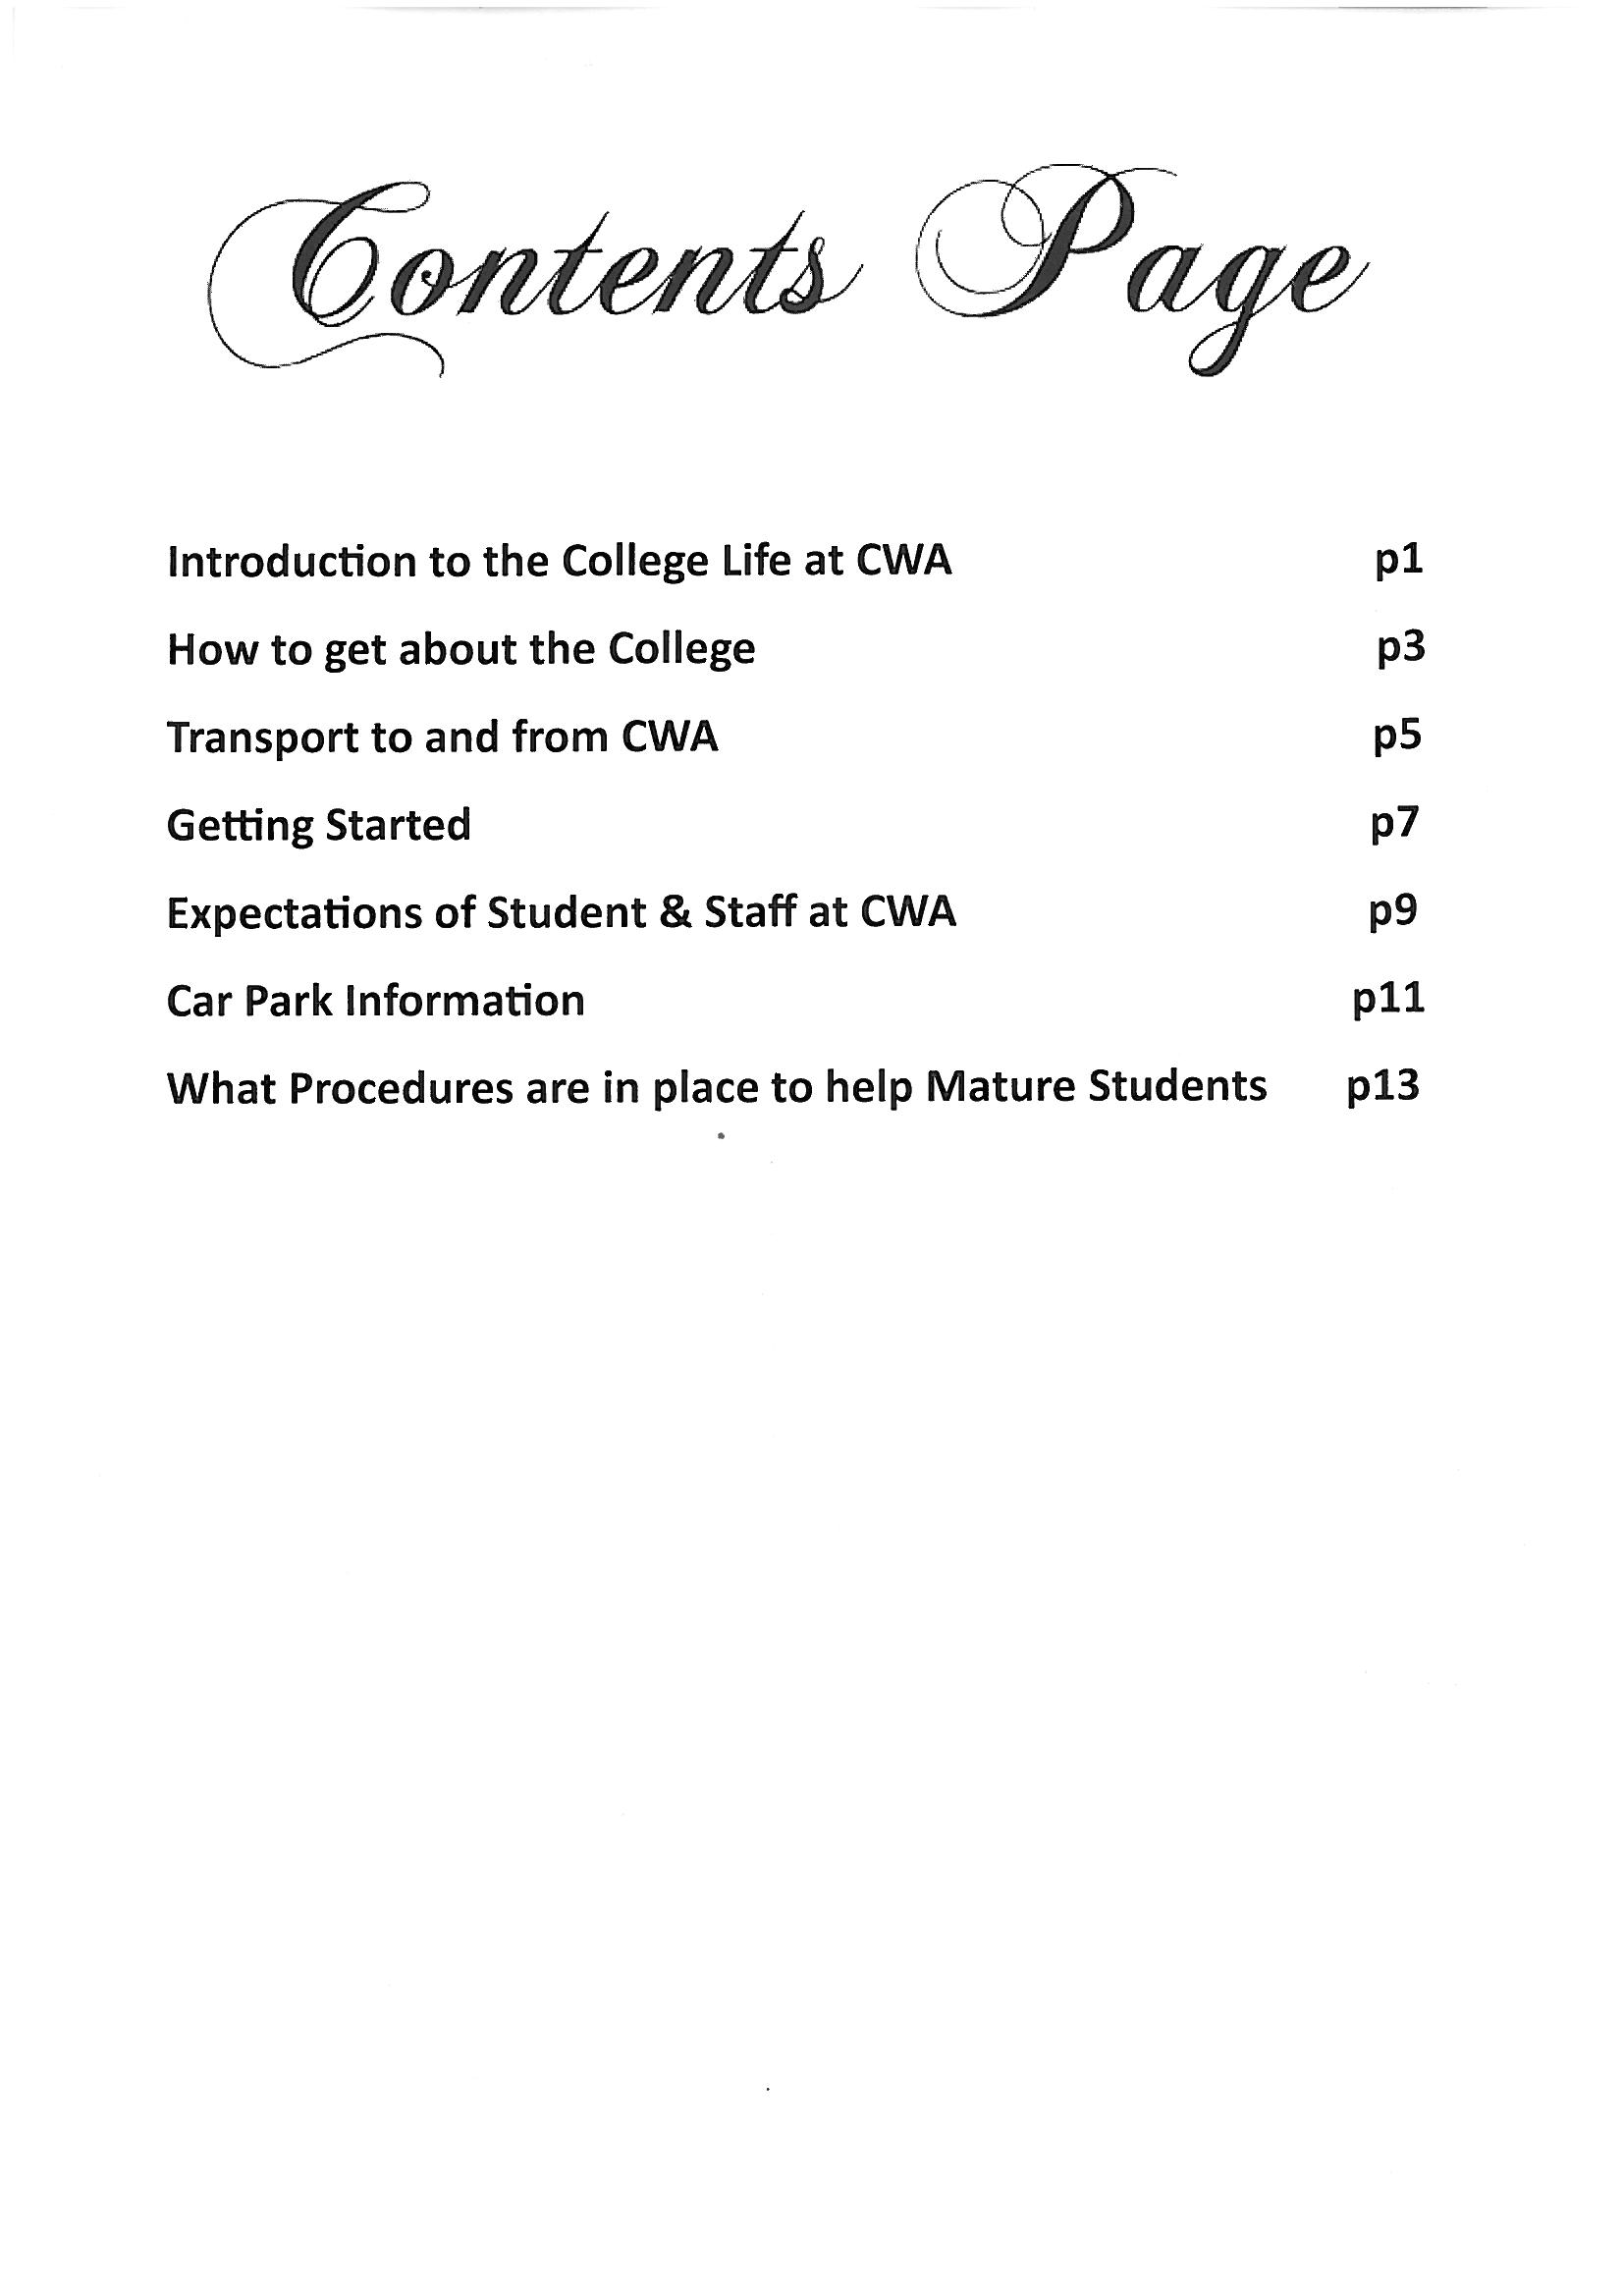 Contents Page for College Magazine